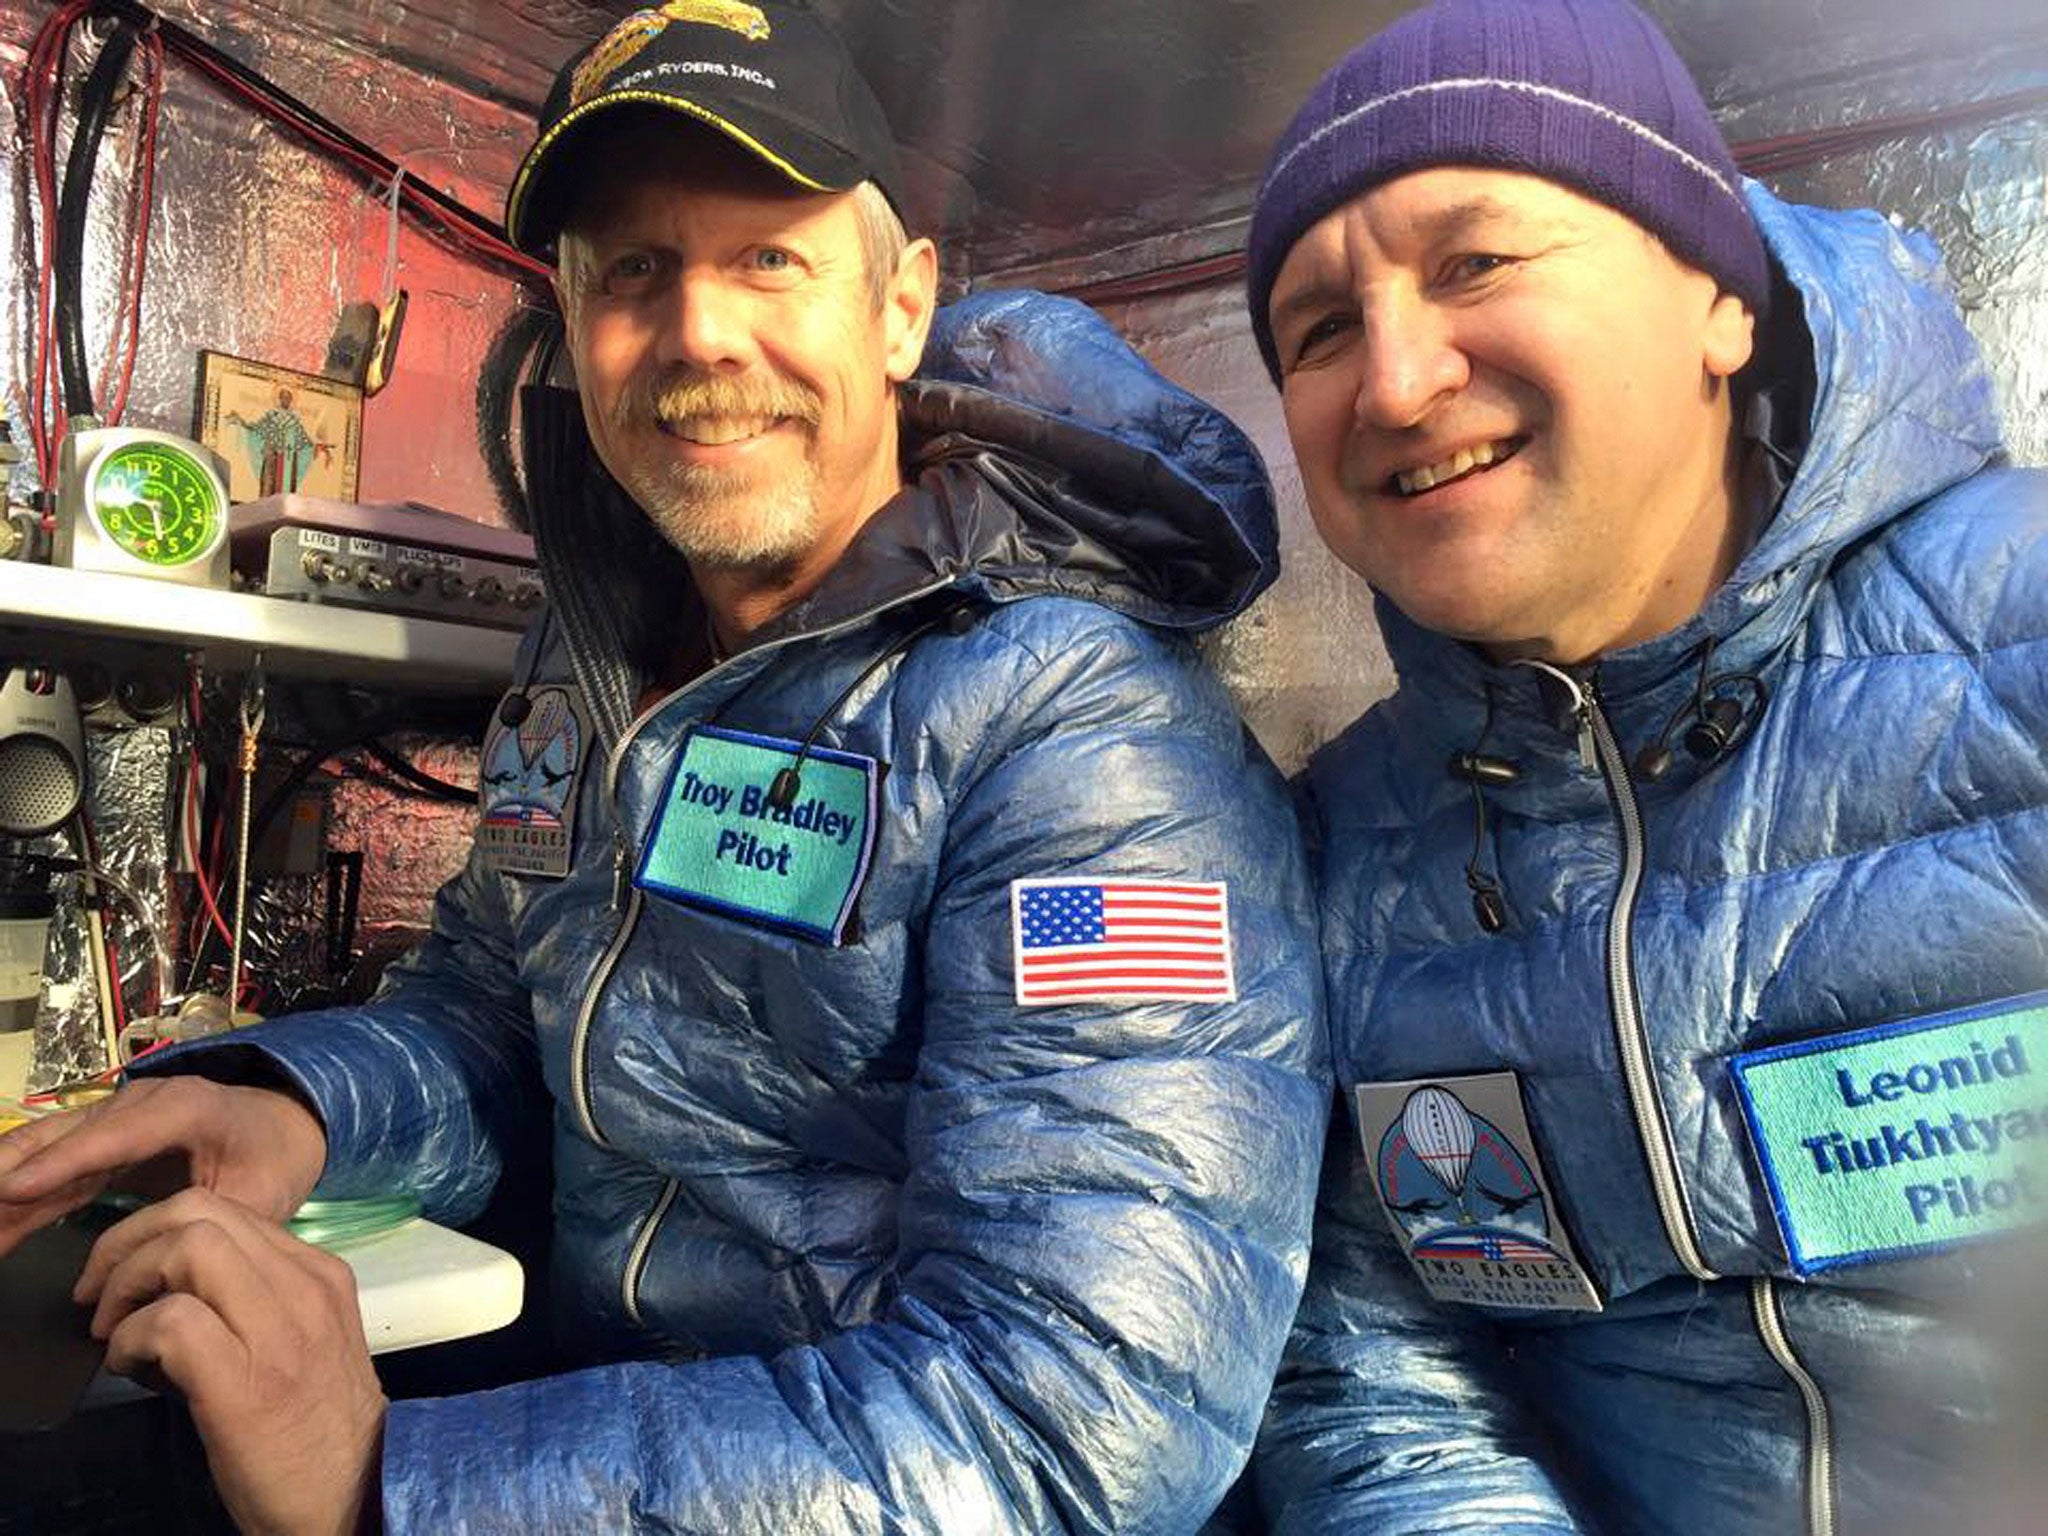 Pilots Troy Bradley (L) of the U.S. and Leonid Tiukhtayev of Russia sit in the capsule of the Two Eagles balloon before setting off on their attempt to cross the Pacific by balloon and set a new distance and duration record for gas balloon travel, in Saga